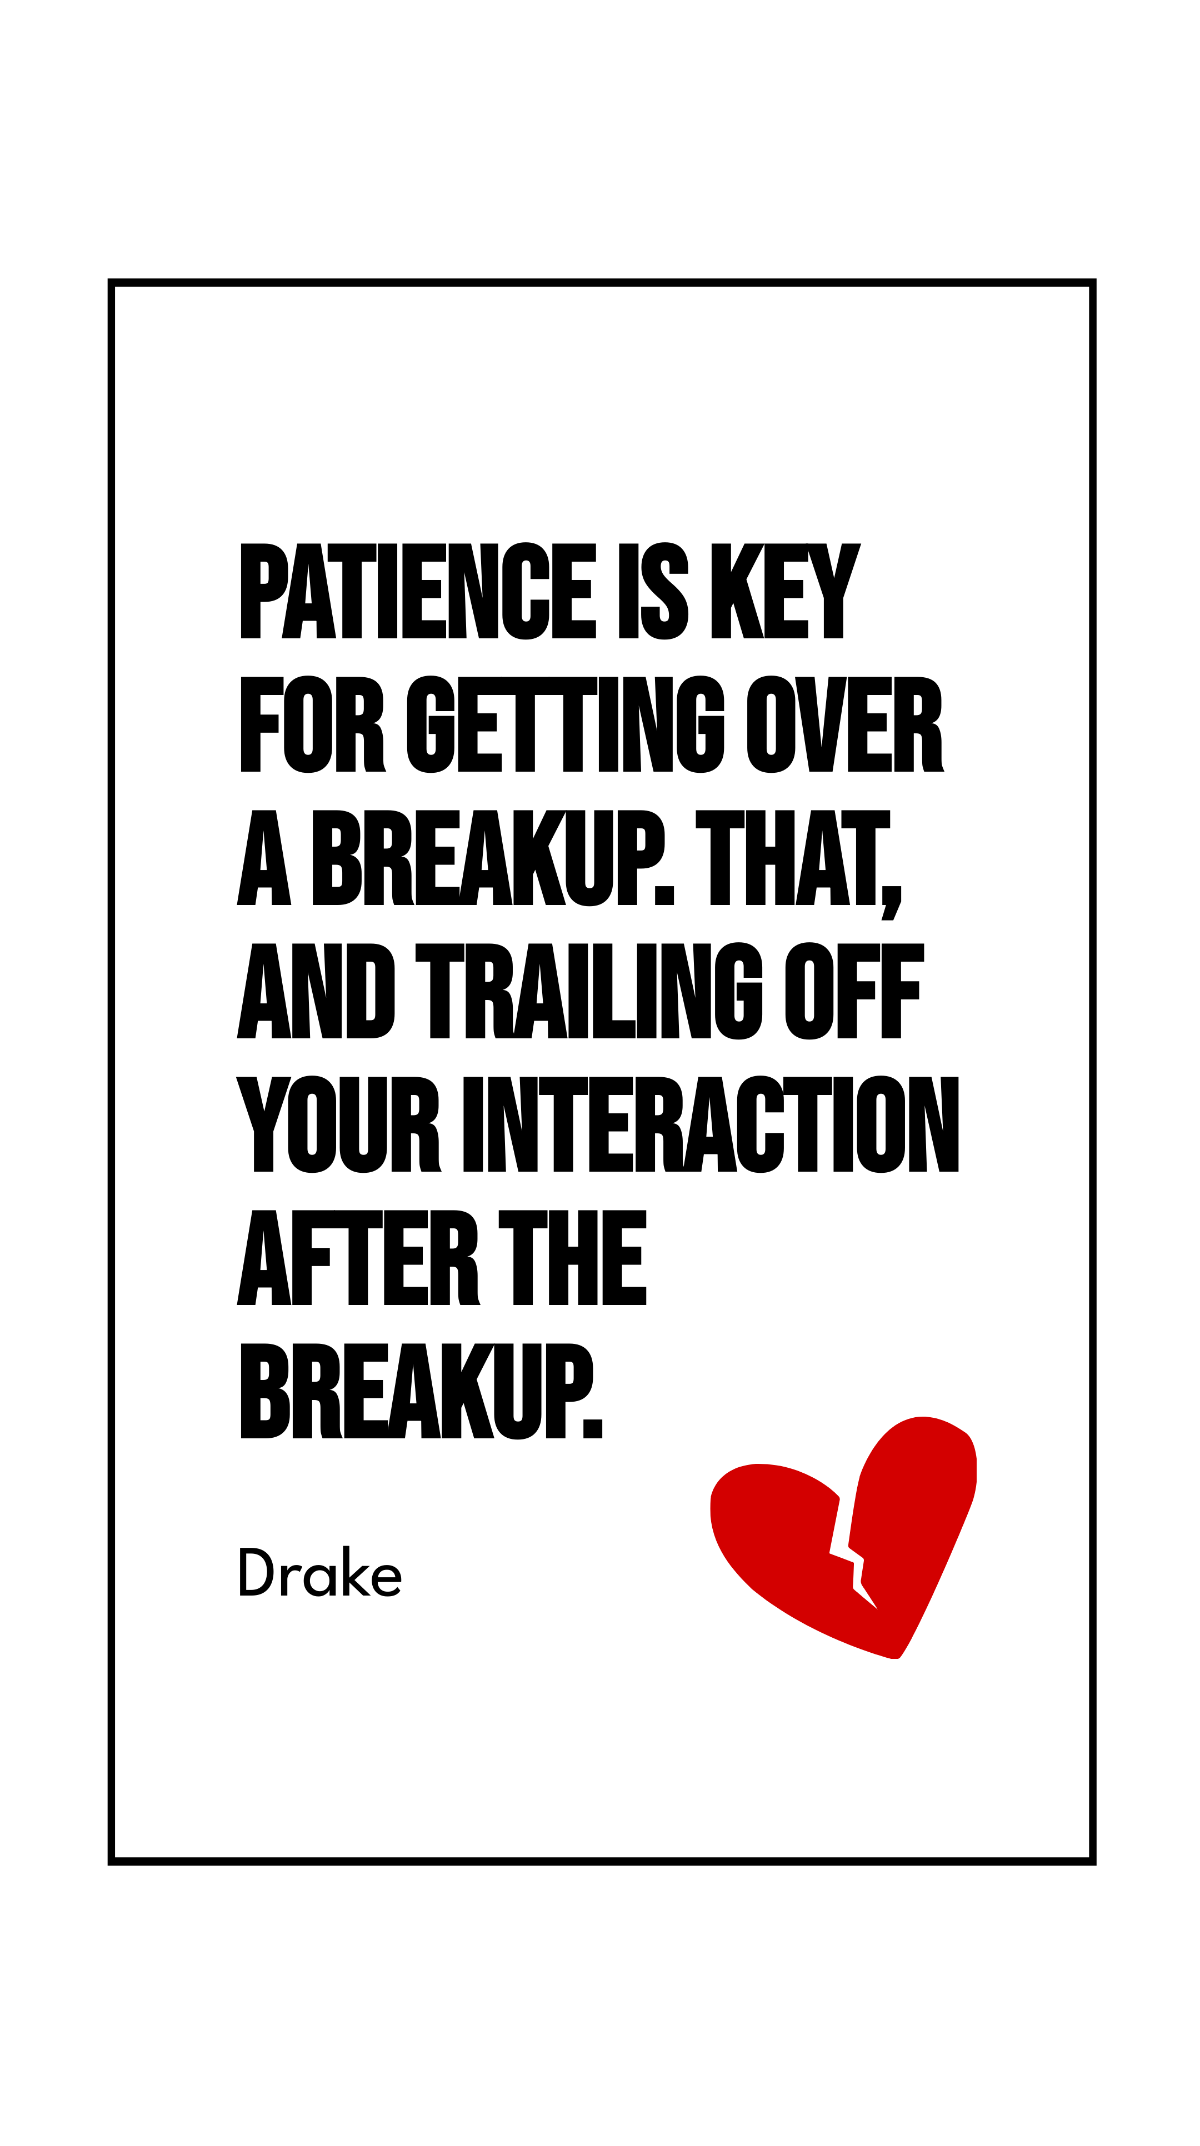 Drake - Patience is key for getting over a breakup. That, and trailing off your interaction after the breakup. Template